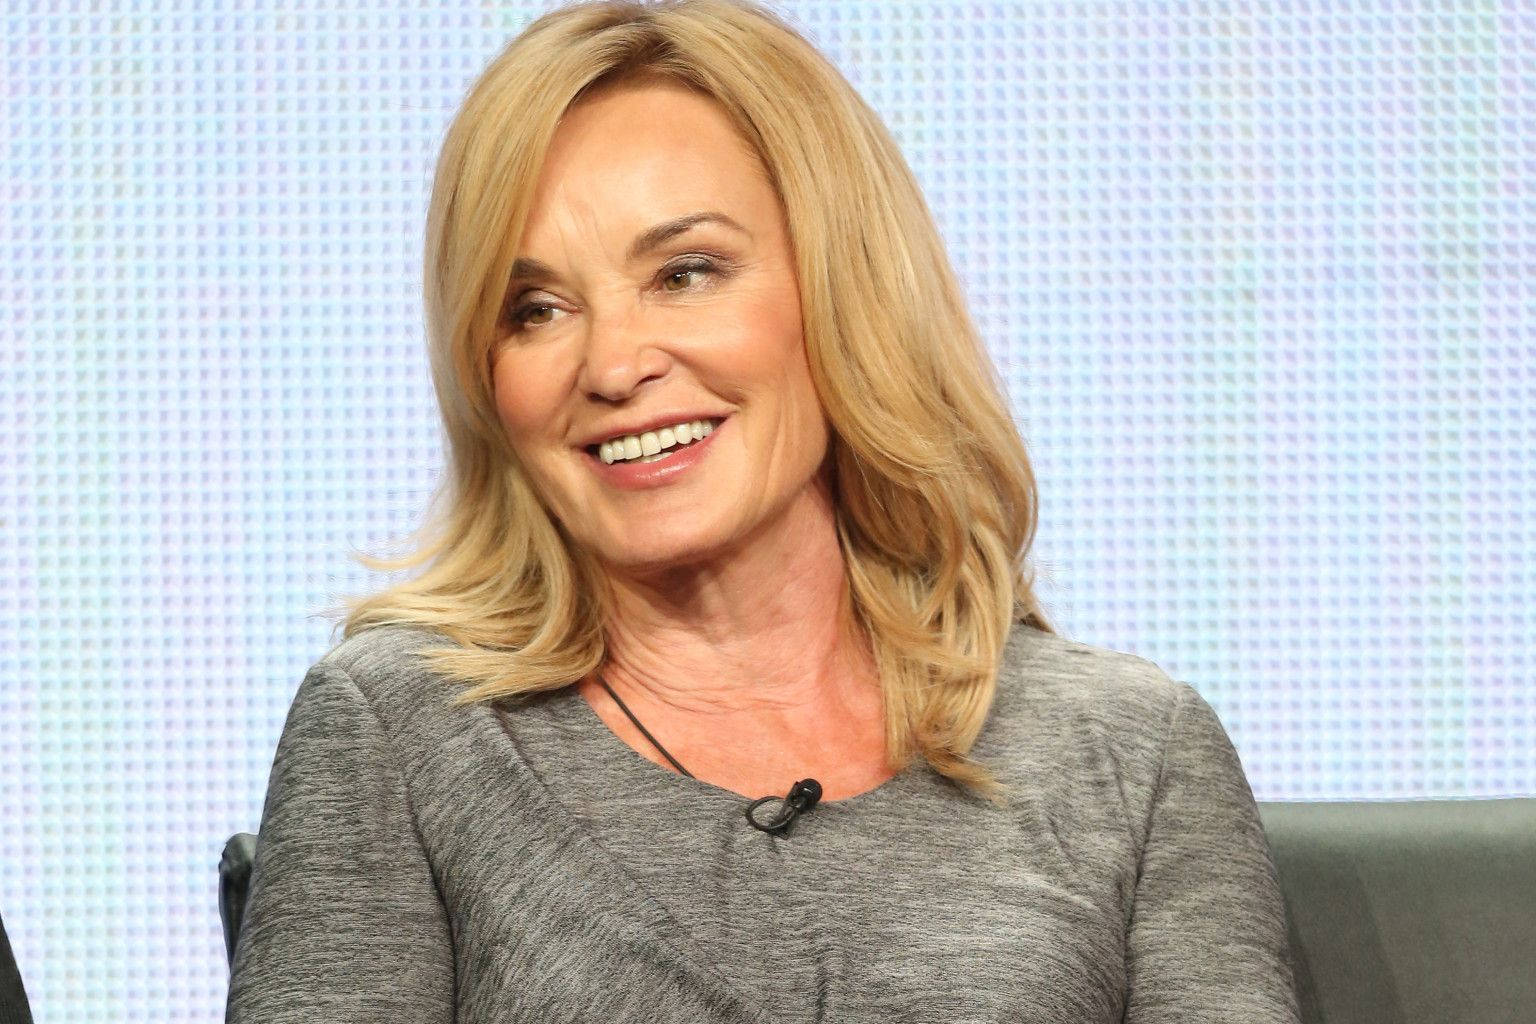 Jessicalange Intervju Session (note: There Is No Mention Of Computer Or Mobile Wallpaper In The Given Sentence. Please Provide More Context For Accurate Translation.) Wallpaper